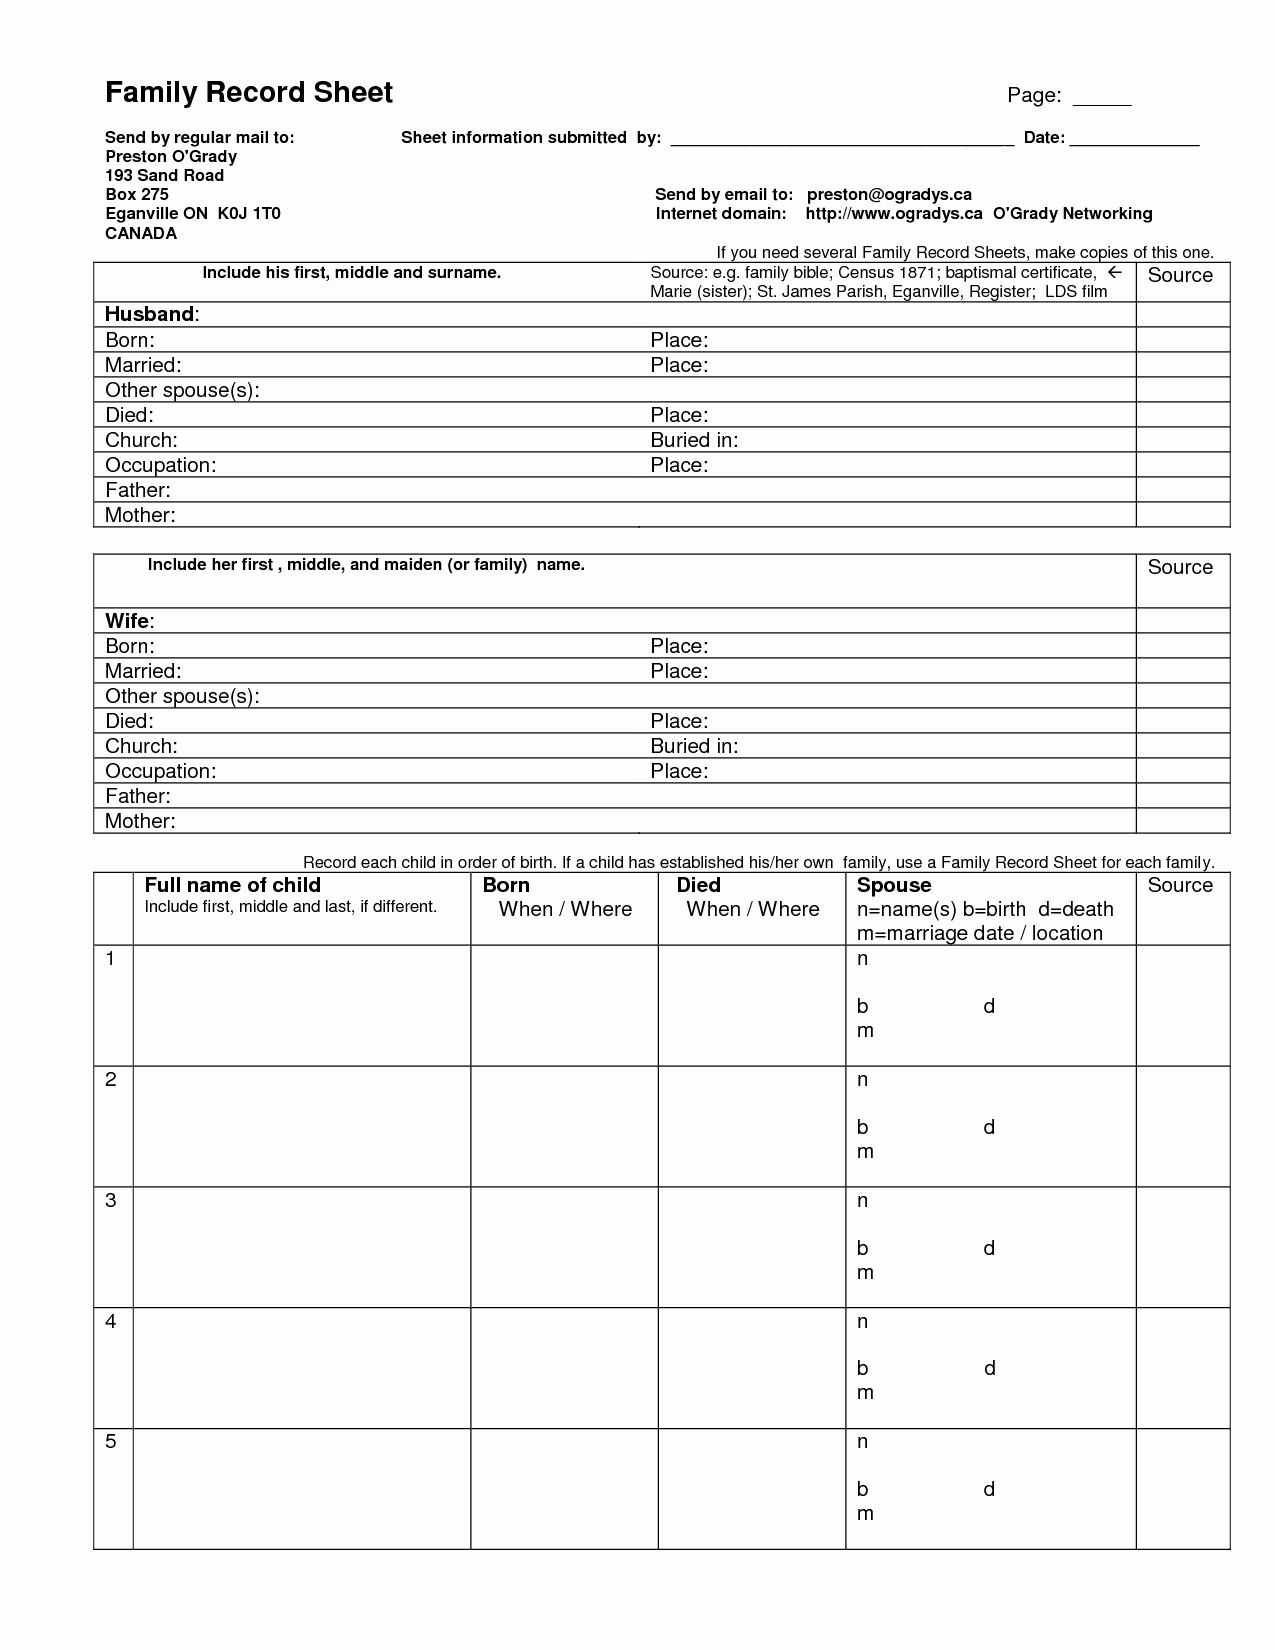 Family Tree forms Printable Fresh Family Record Sheet Doc Genealogy forms